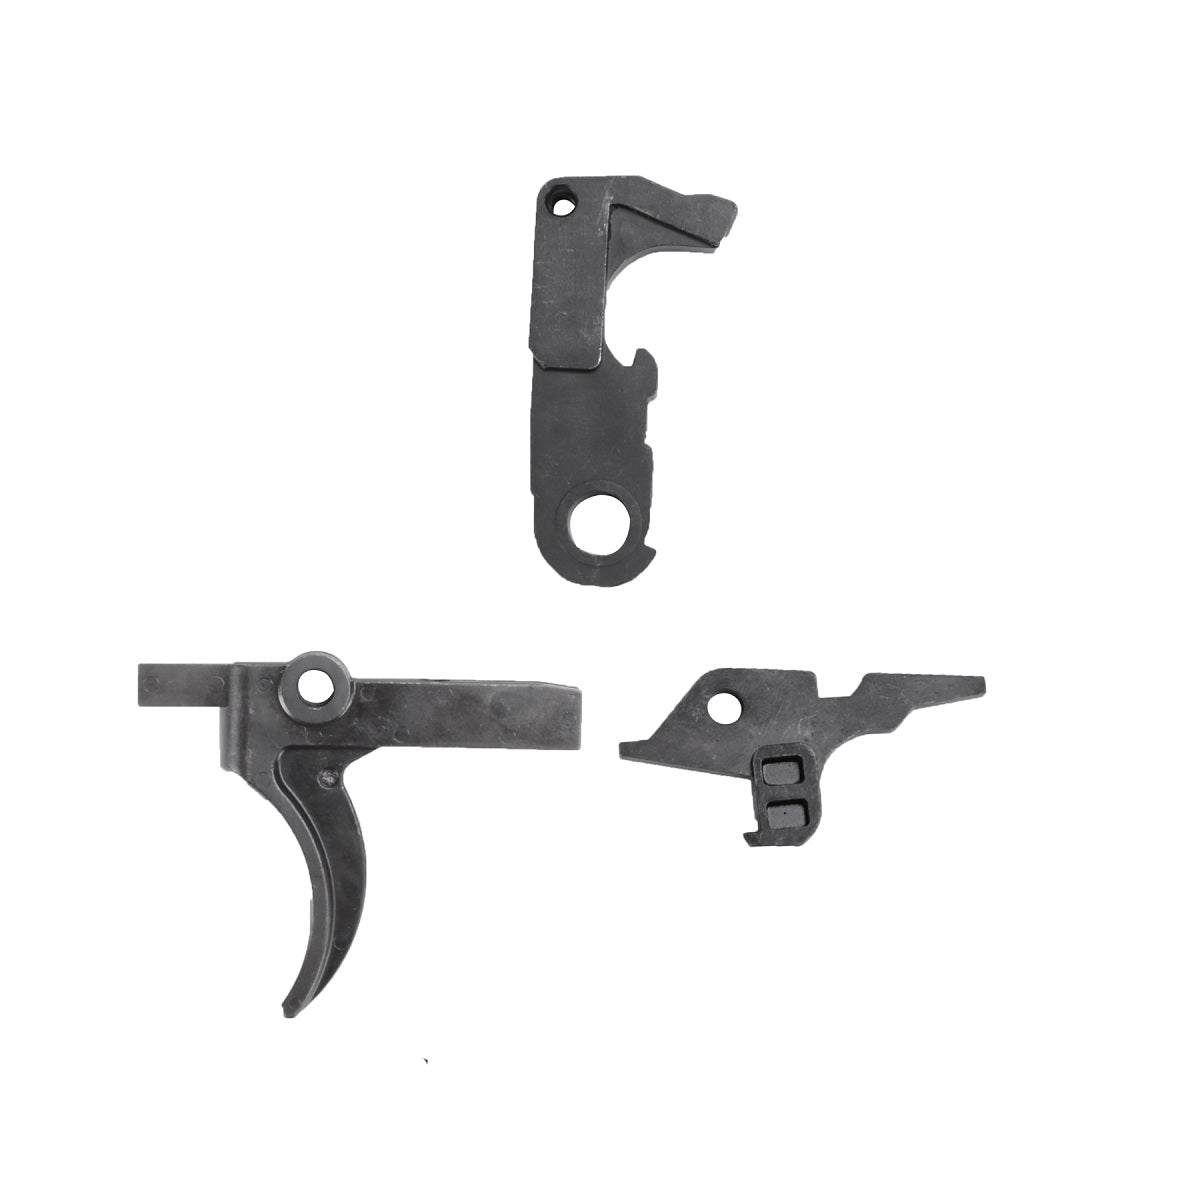 King Arms Reinforced Accessories Set A for KA M4 / TWS 9mm GBB ( PT-25 )